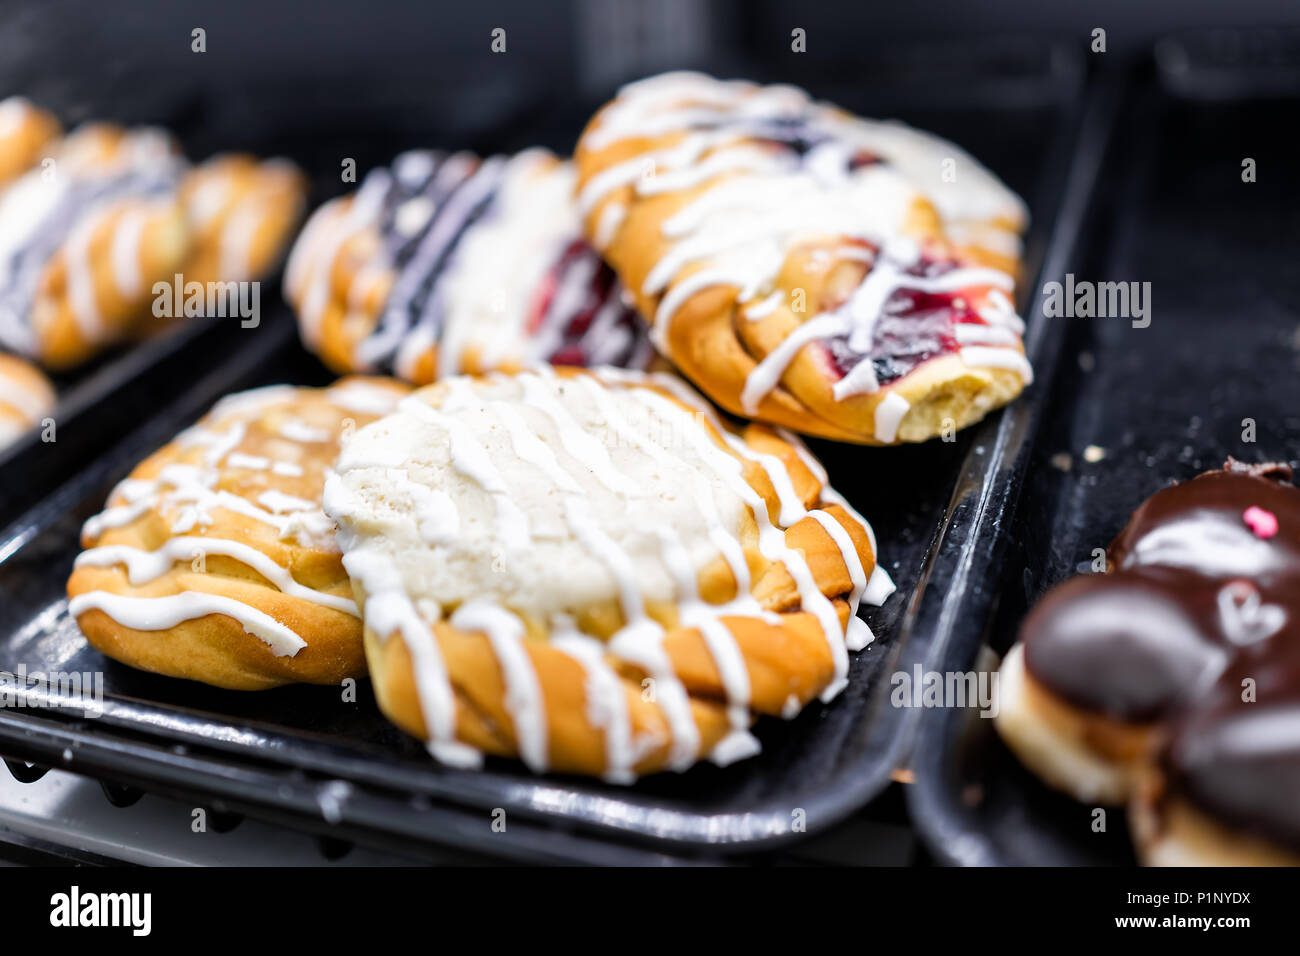 Closeup Of Many Yellow Cream Cheese Berry Fruit Icing Drizzled Baked Danish Pastries On Shelf Tray Display Desserts In Bakery Shop Cafe Store Stock Photo Alamy